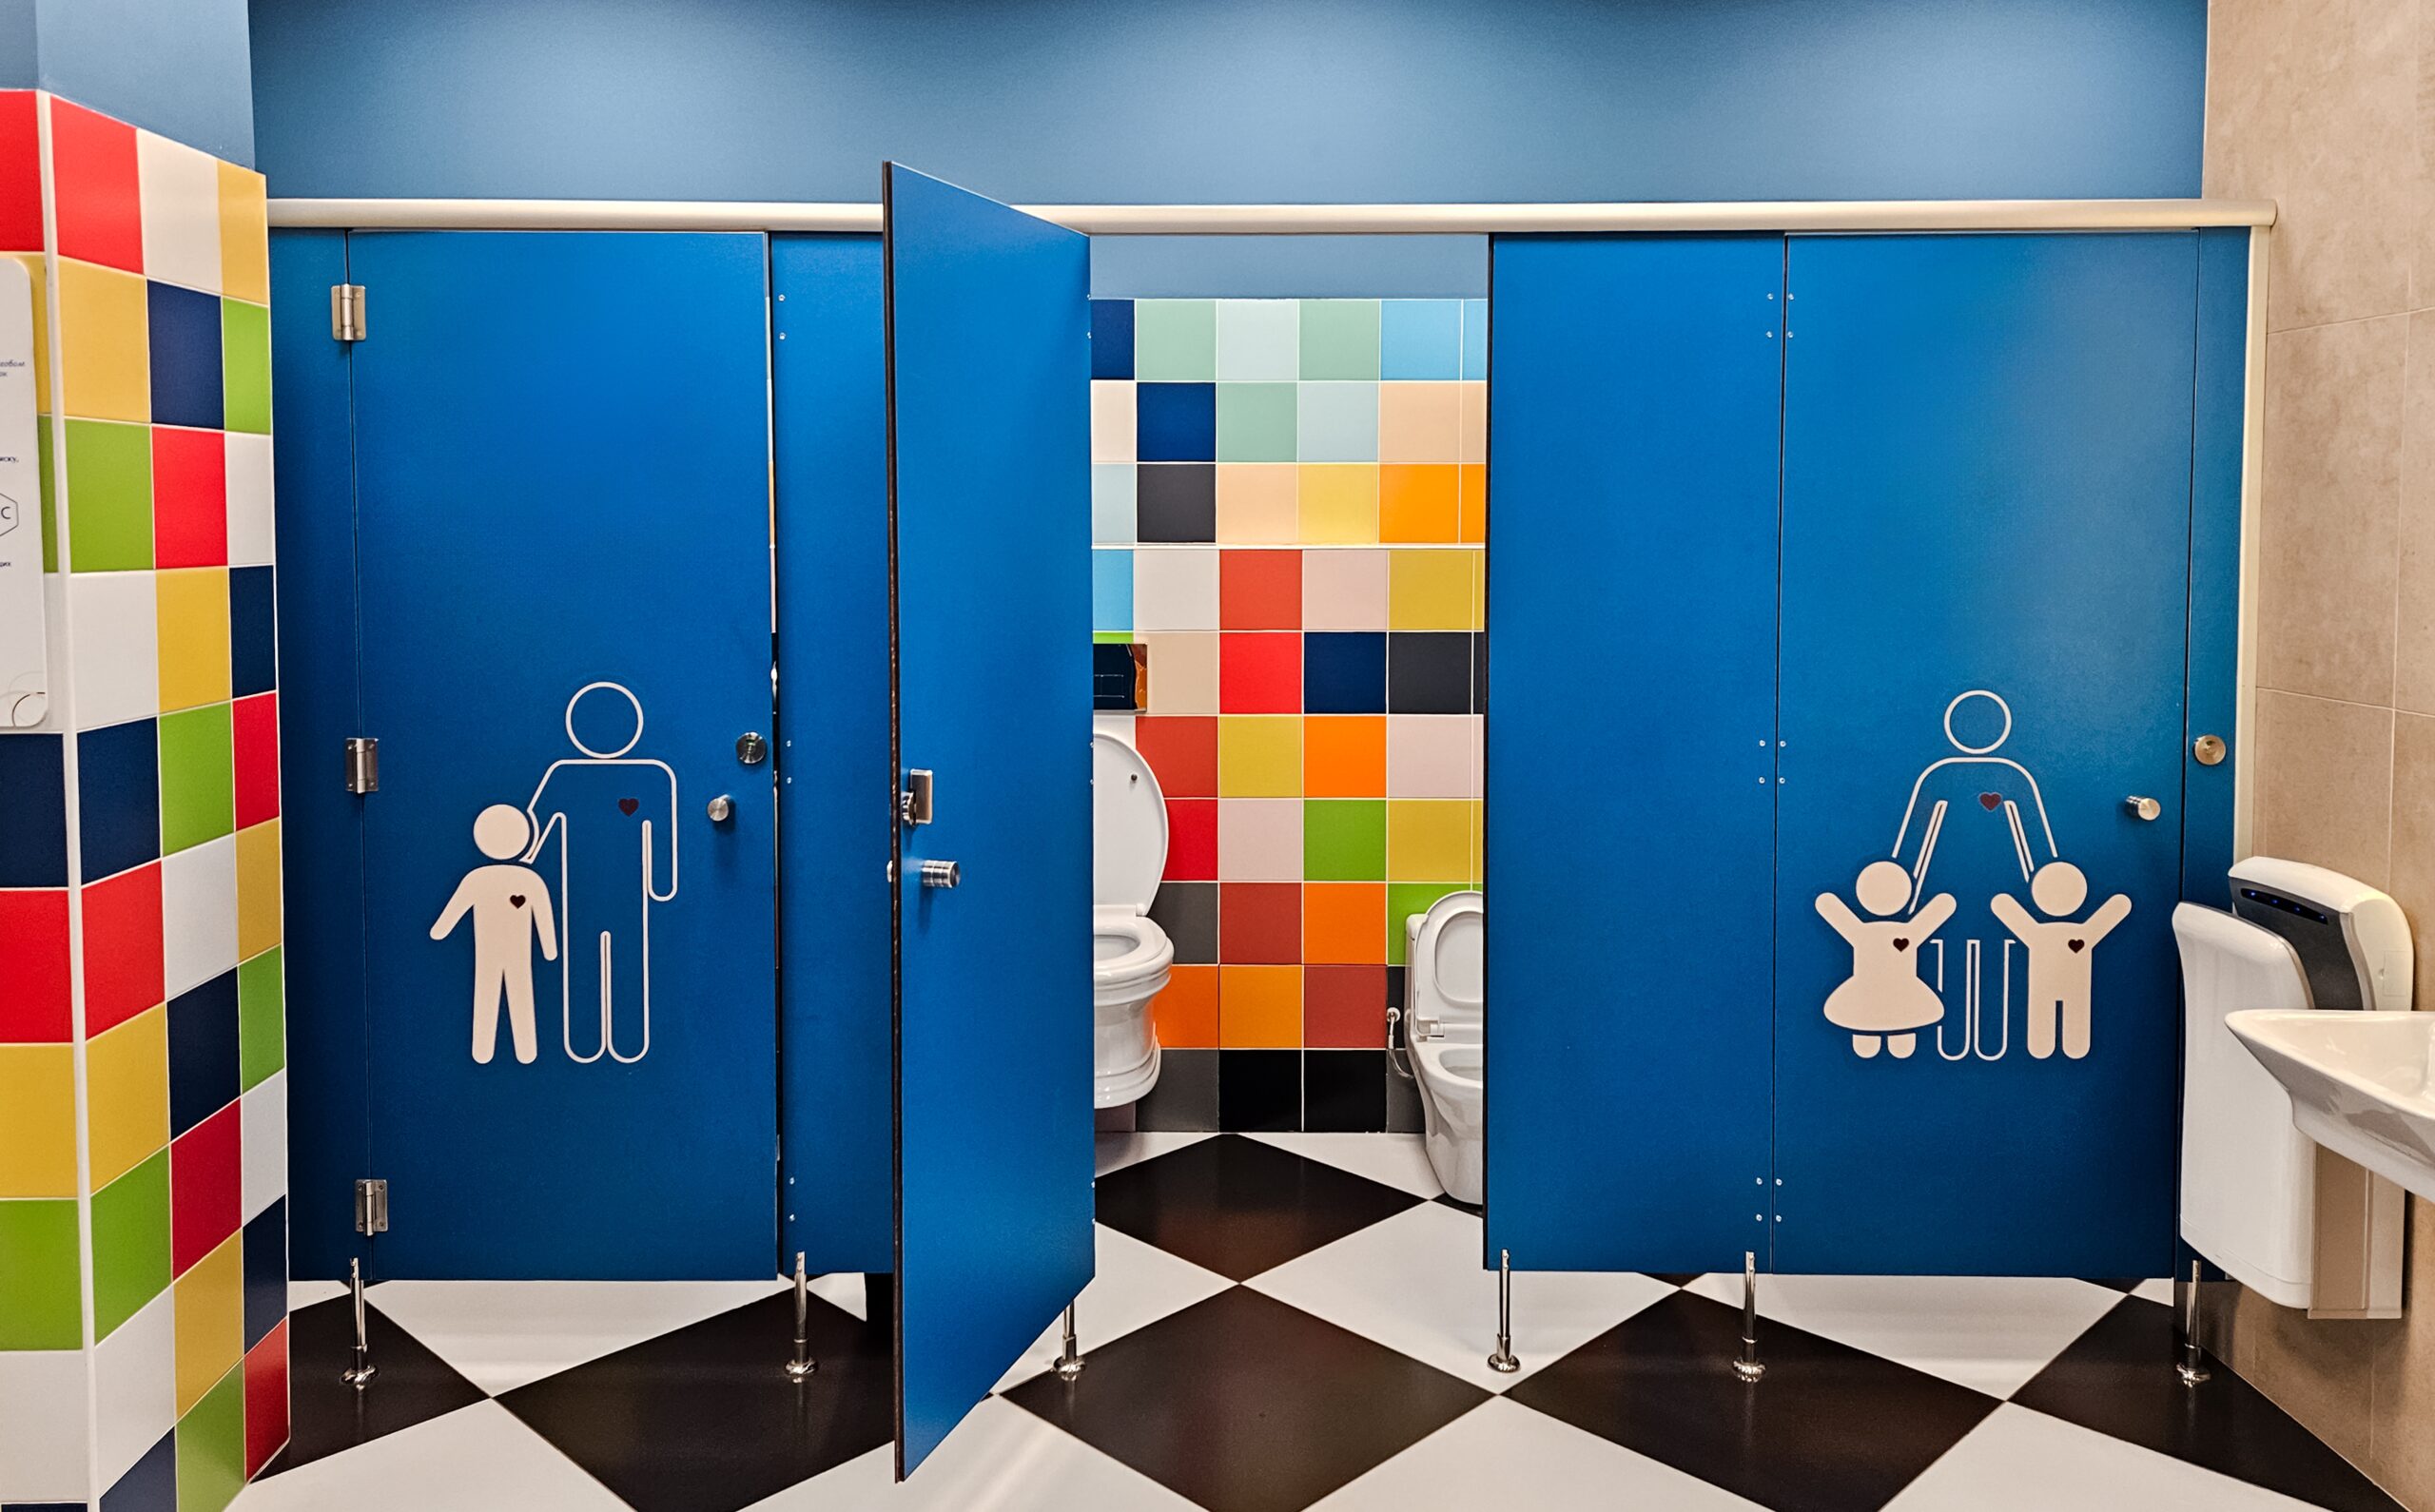 Shared family bright restroom in airport, mall Unisex WC for mom, dad,little girl boy,child kid Use together Recreation room, toilet for adults, daughter,son Separate cabins for parents,children